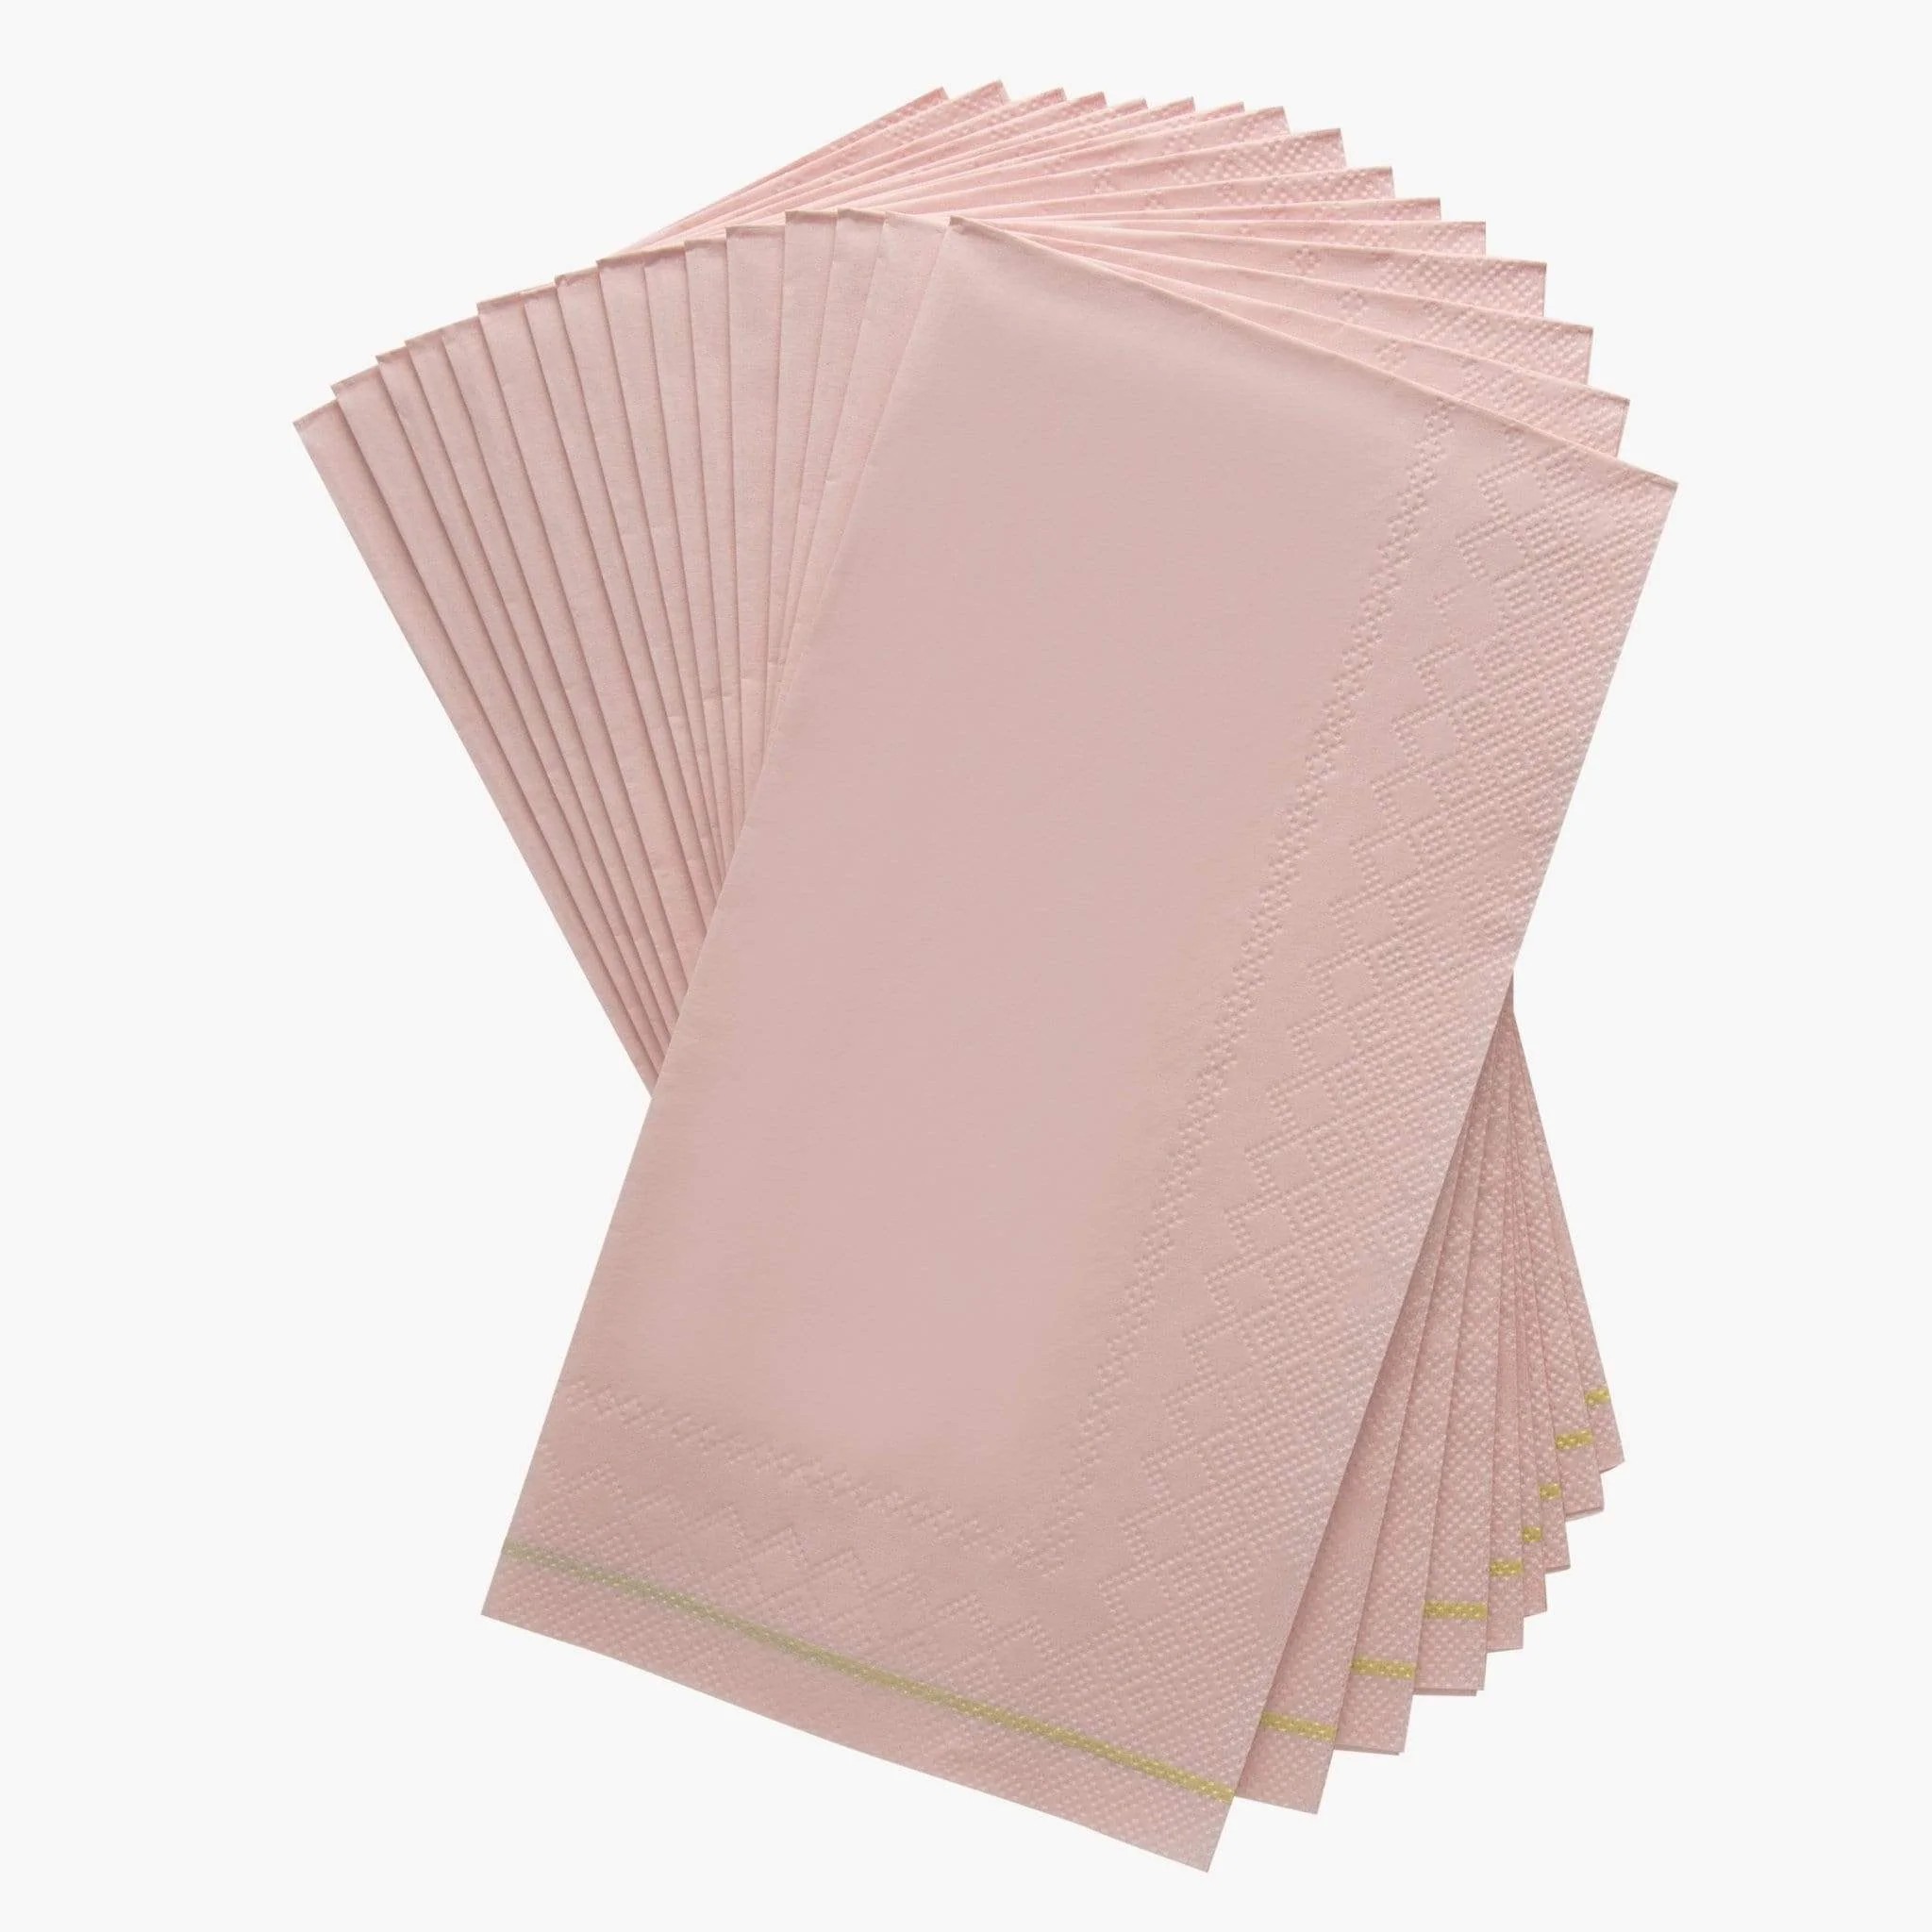 Luxe Party Blush with Gold Stripe Dinner Napkins - 16 pcs